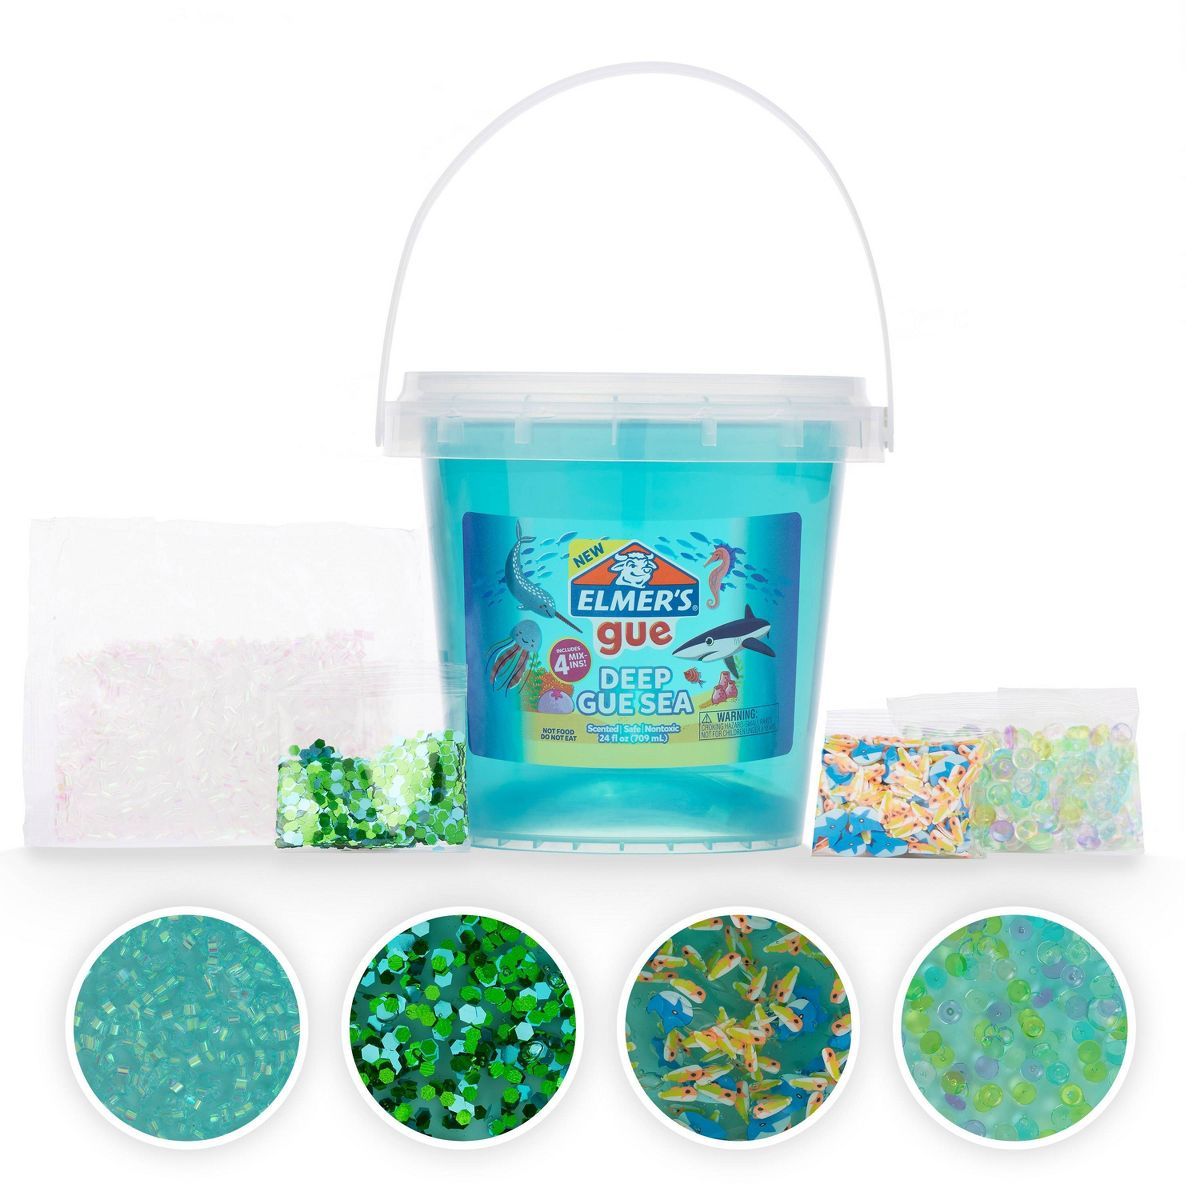 Elmer's Gue 1.5lb Deep Gue Sea Premade Slime Kit with Mix-Ins | Target